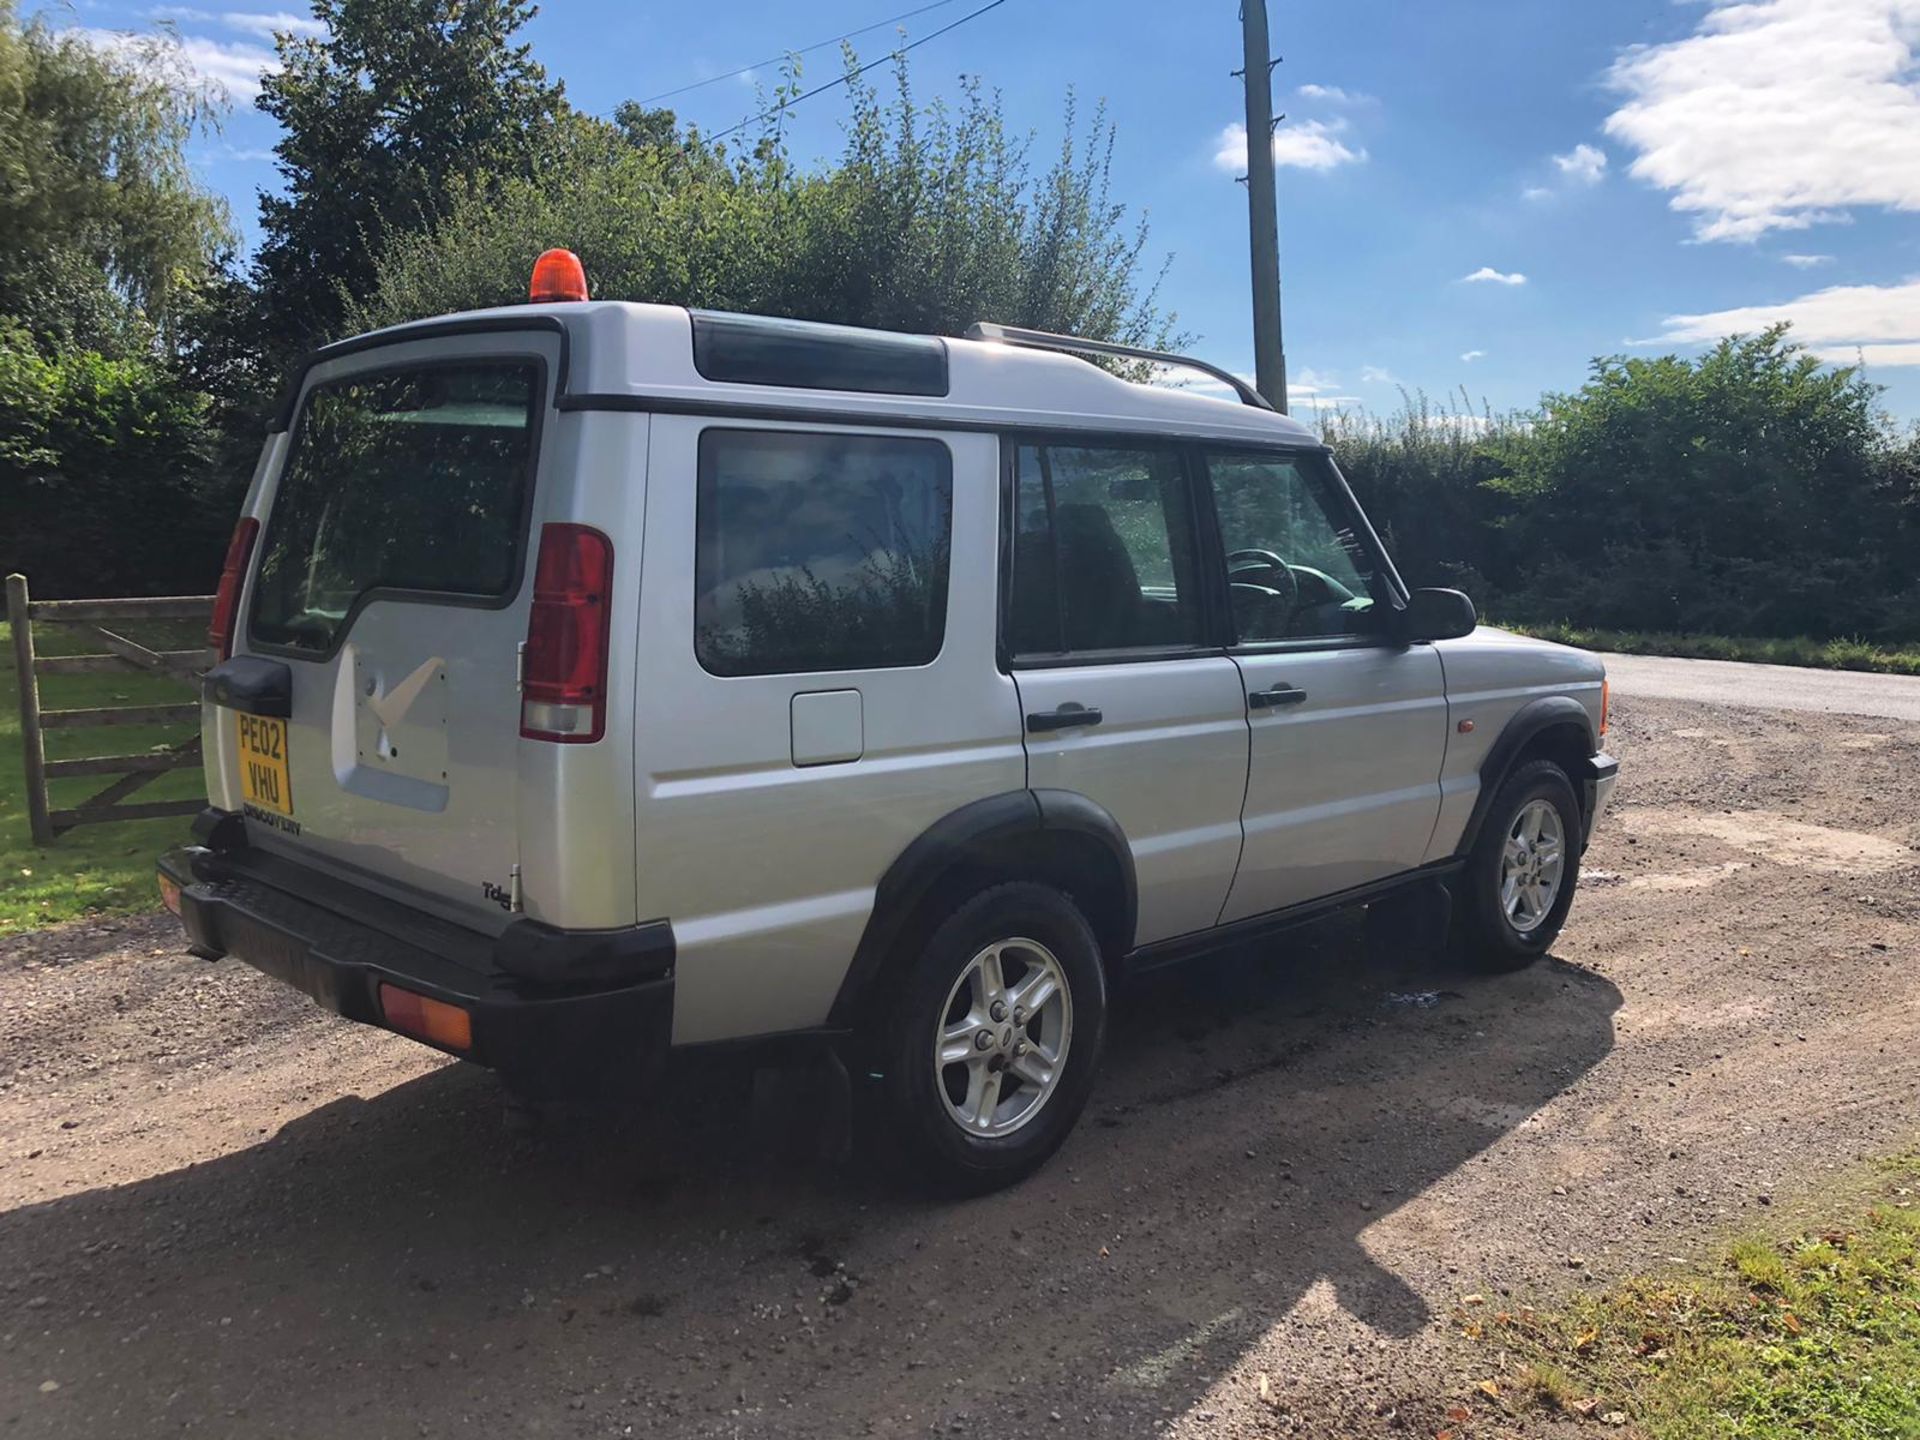 2002 LAND ROVER DISCOVERY TD5 GS SILVER ESTATE, 2.5 DIESEL ENGINE, 201,155 MILES *NO VAT* - Image 8 of 16